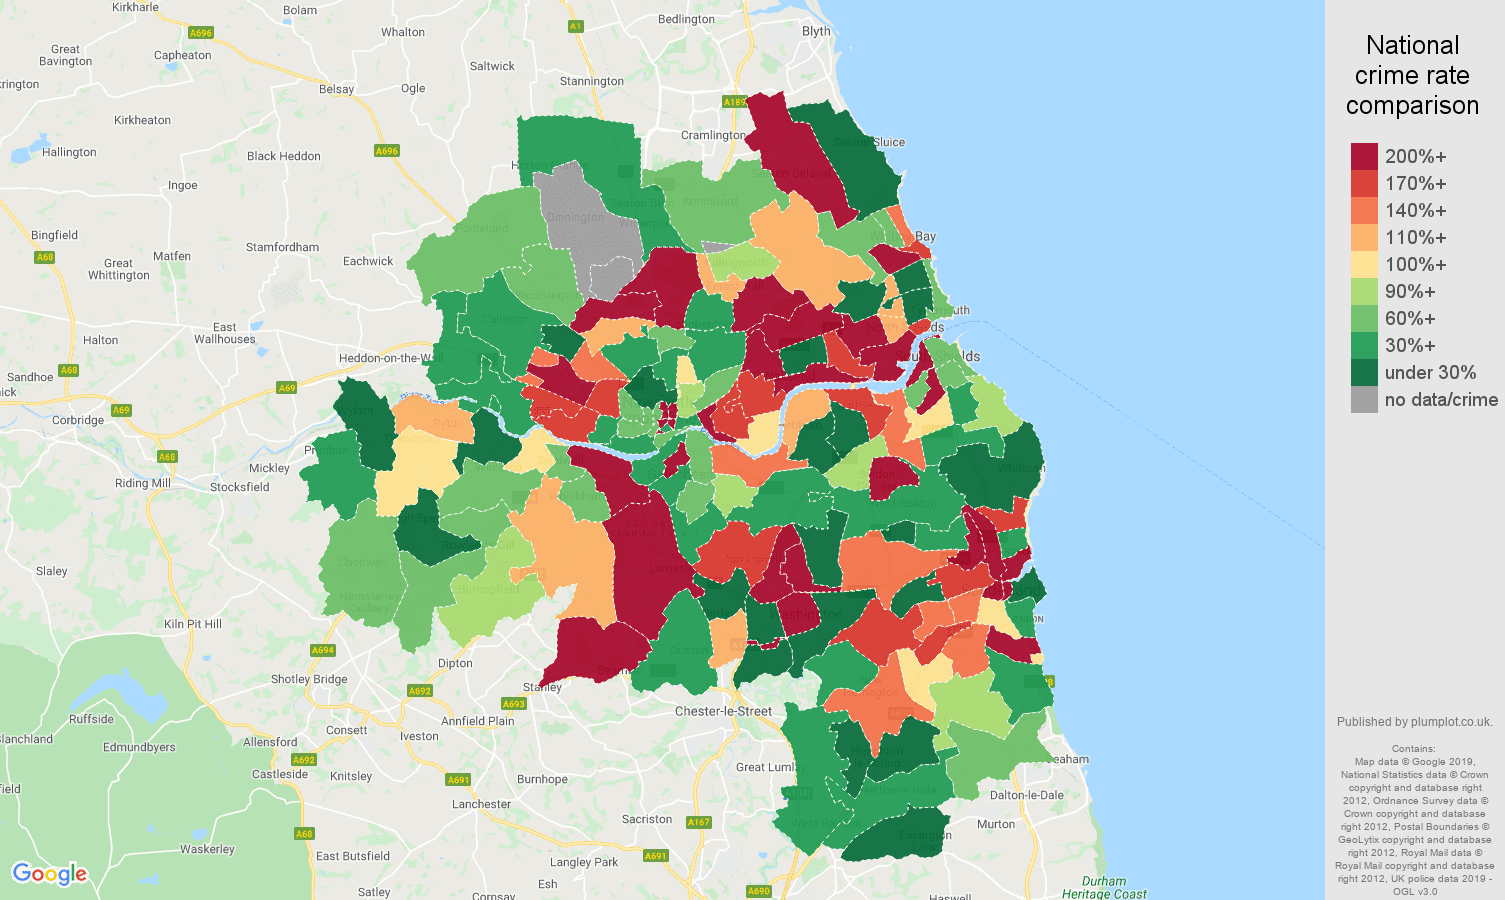 Tyne and Wear shoplifting crime rate comparison map